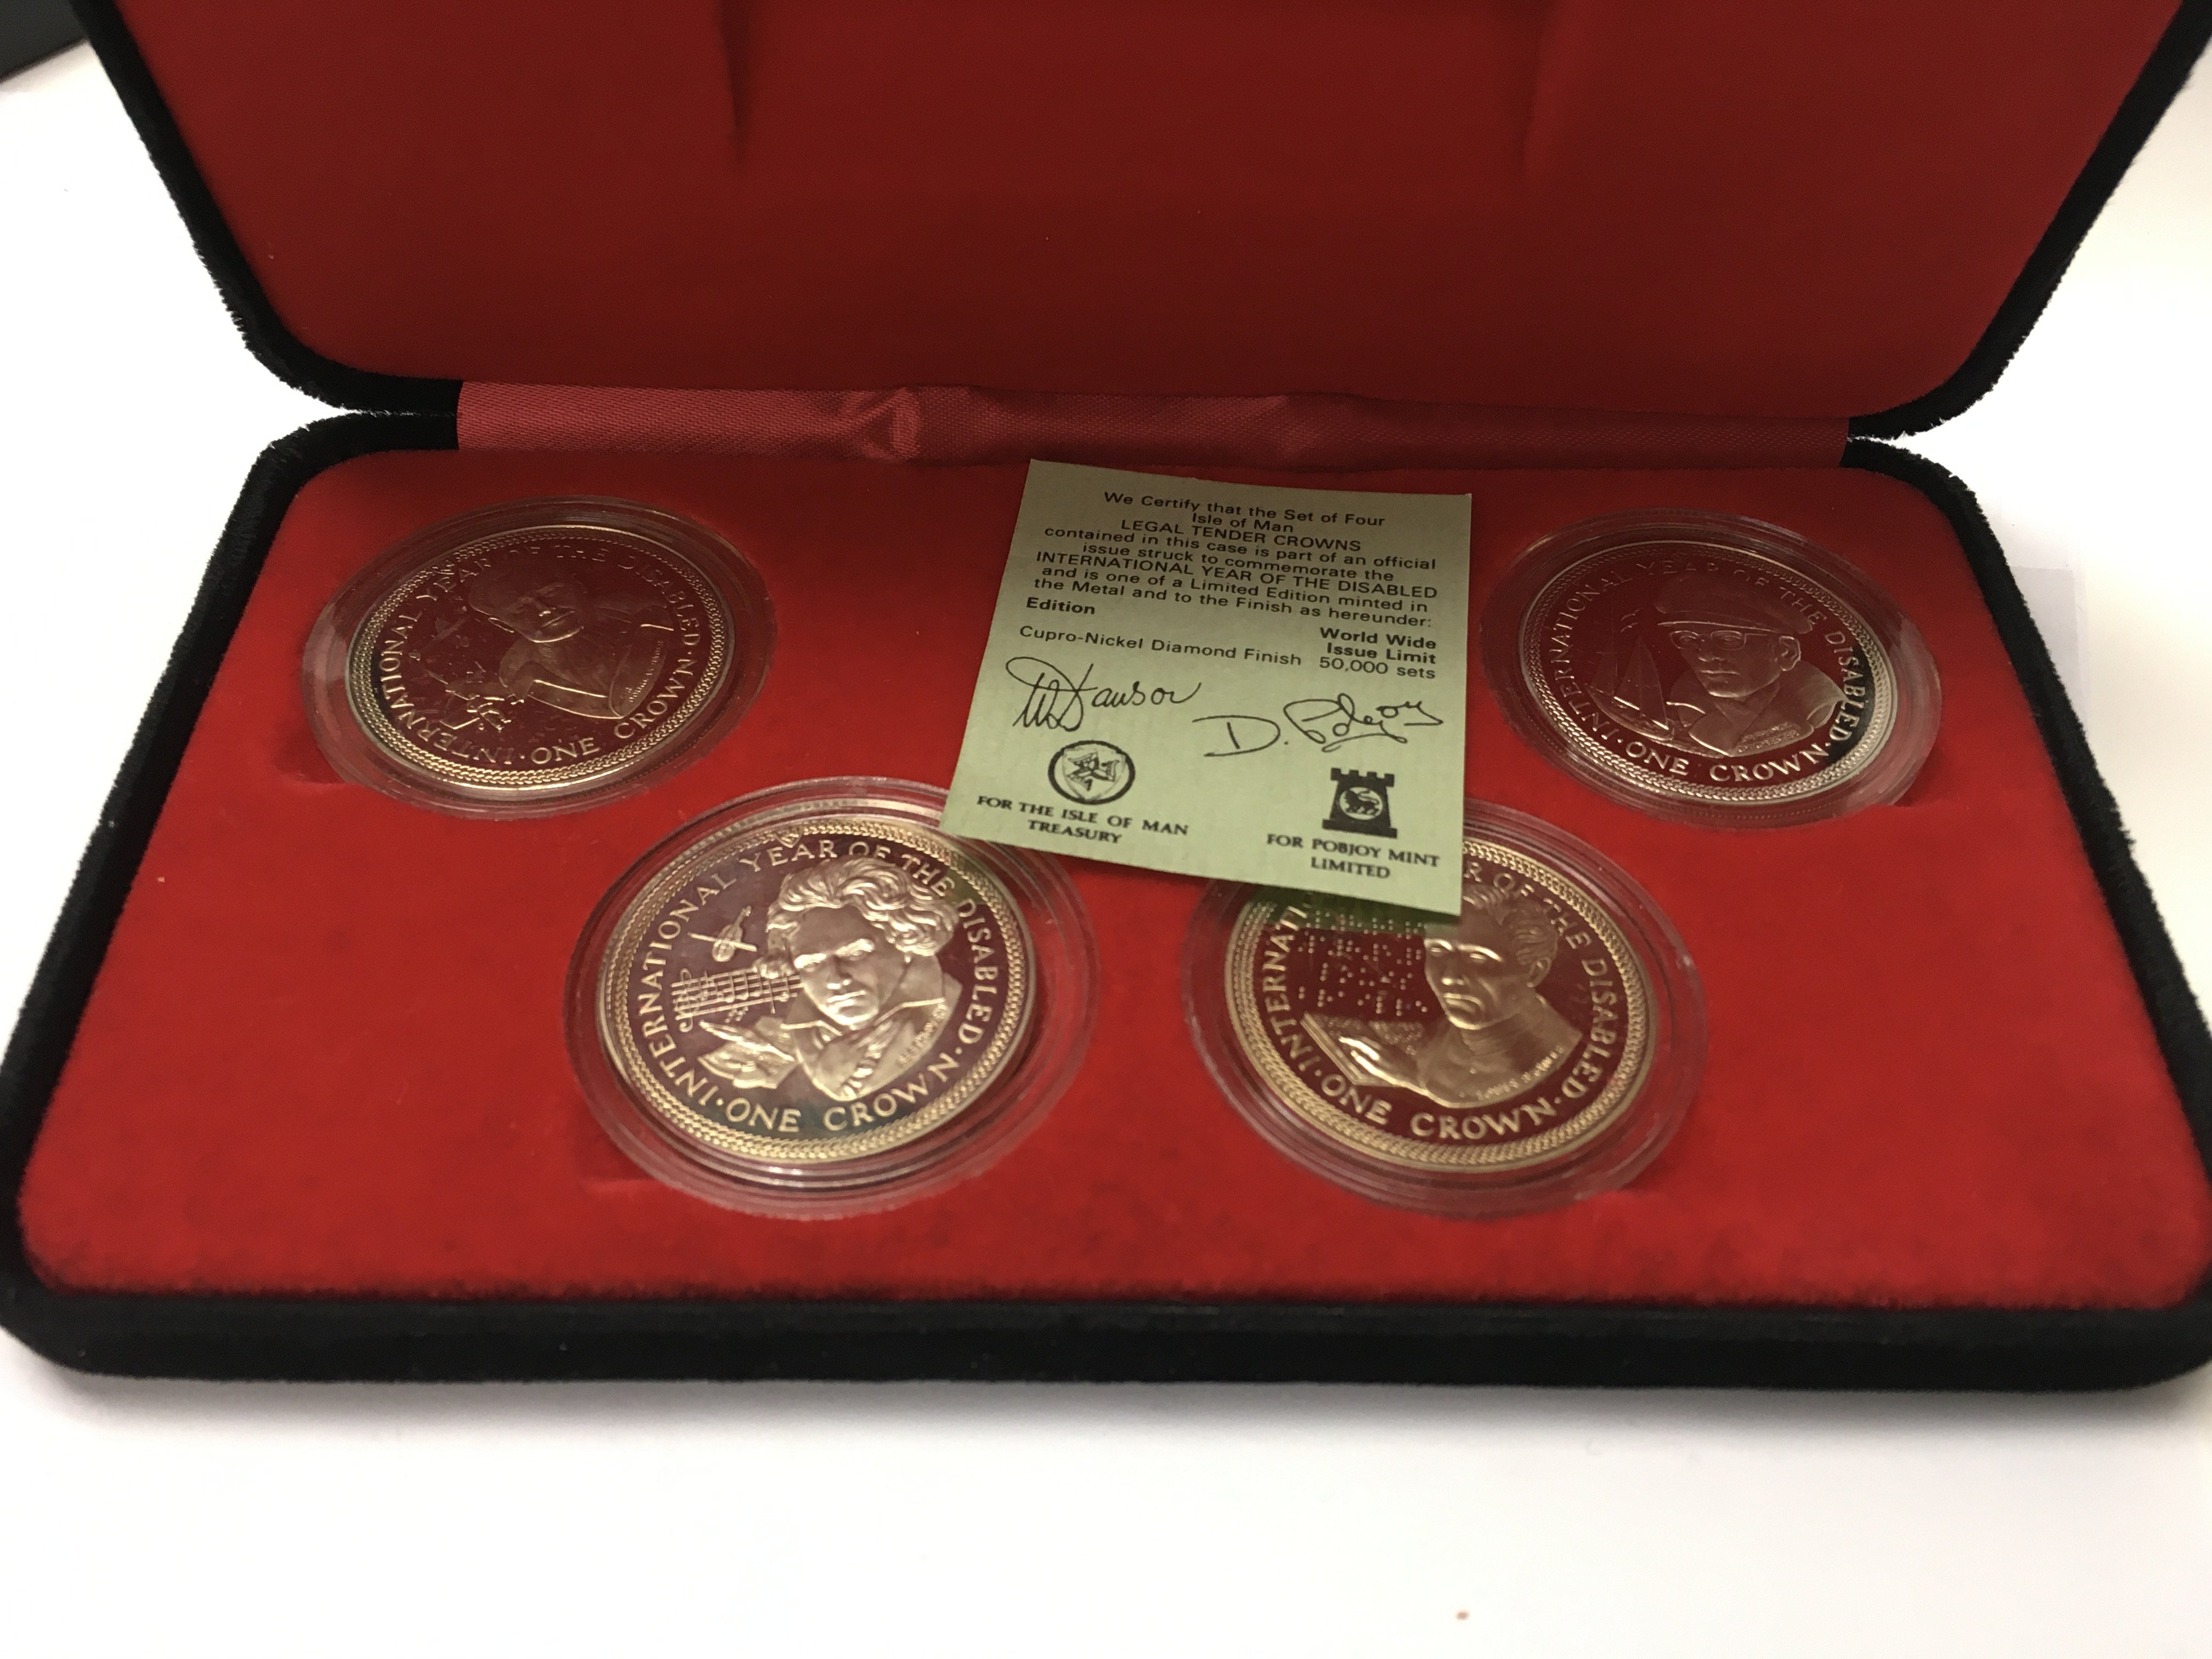 A commemorative set of cupro nickel coins.